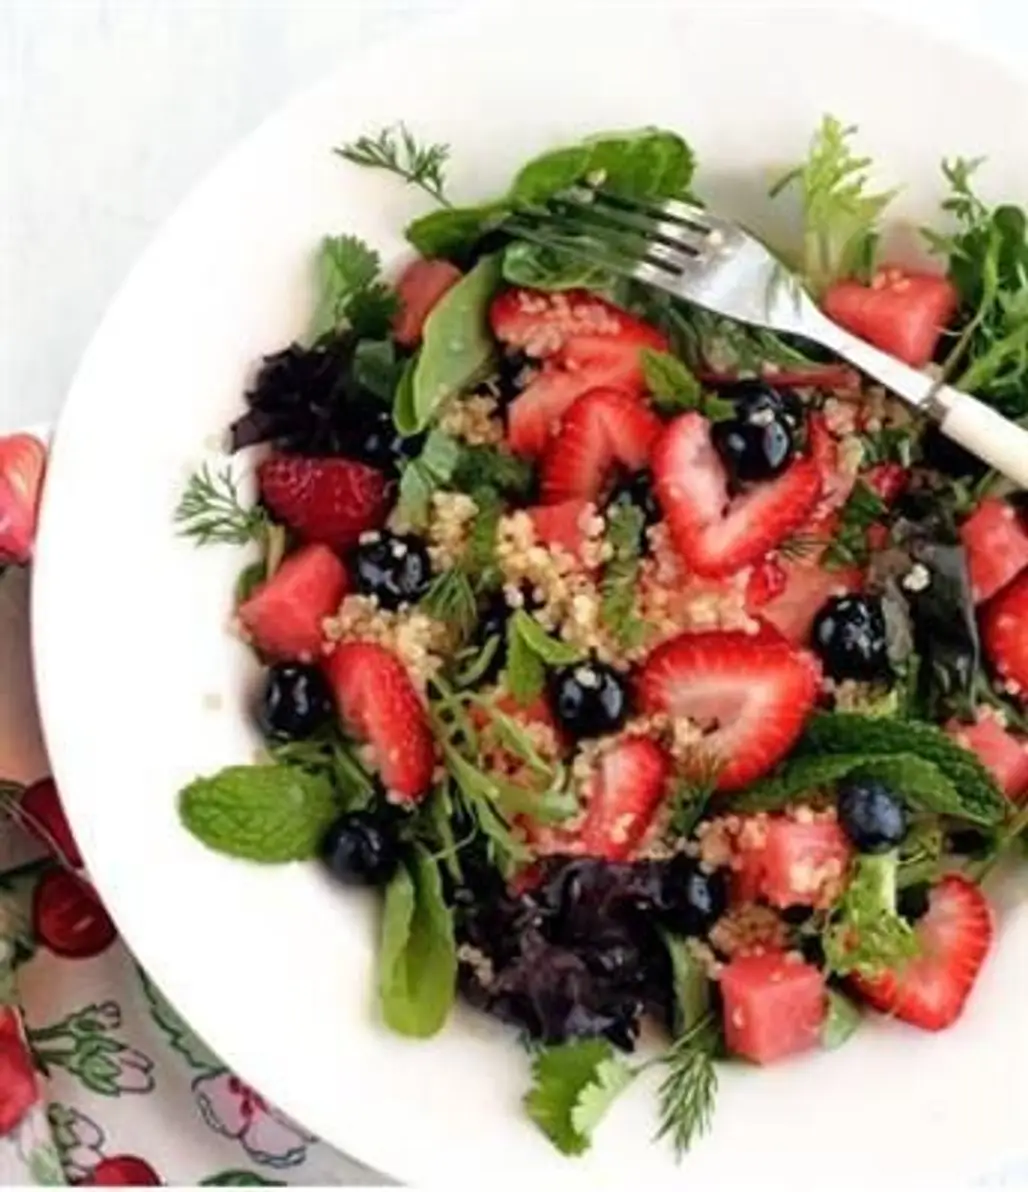 Quinoa Salad with Blueberries, Strawberries and Watermelon